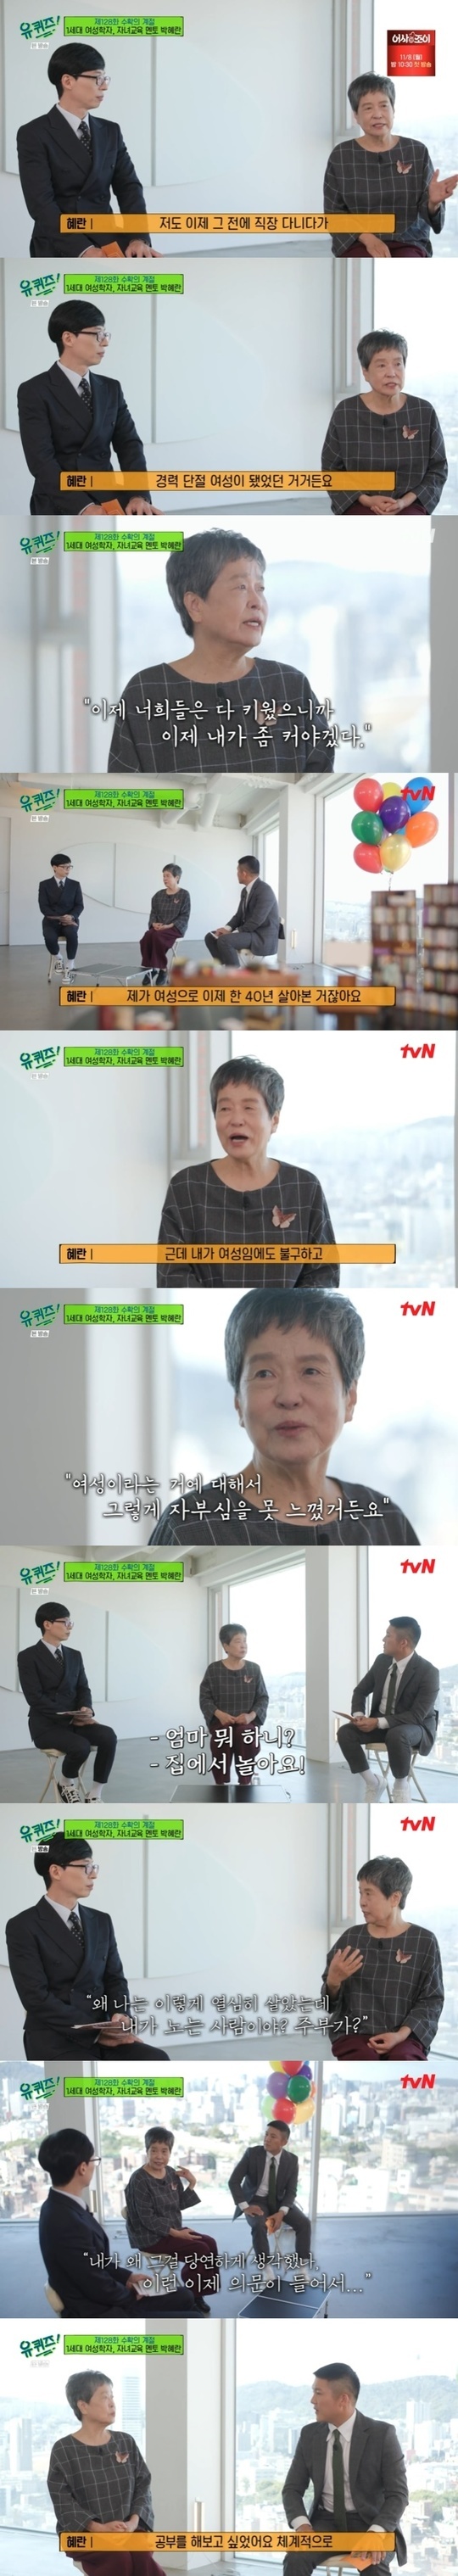 The feminist Park Hye-ran conveyed the reason why she studied womens studies and conveyed a meaningful message to all women.In the 128th episode of TVN You Quiz on the Block broadcasted on October 27, Park Hye-ran, the mother of Lee Juck, the first generation female scholar and singer of Korea, appeared as a guest.Park Hye-ran is a person who has been working as a mentor for mothers by writing 3,000 lectures and 13 books for 30 years before the mother of singer Lee Juck.He is famous for his author of the childrens education book Children who grow up as much as they believe after sending all three sons to Seoul National University.Park Hye-ran said, When my youngest child entered college, there were many stories about whether I would write know-how as a book.However, in fact, I have been giving a lot of lectures since then, Do not concentrate on one study too much, but we have a little room and we will see the world with a wide range of arms.This is a good story, but it doesnt work. Because thats not the reality of Korea.If you tell children what they want to do, it was a society that said, Lets go to college. Park Hye-ran said, I think that the idea of ​​I can raise it like this because the three children entered Seoul National University. He said that he became a best-selling writer.The education method that Park Hye-ran emphasizes was Kurah because I know as it is revealed in the title of the book. My mother was too busy to take care of you all.Singer Lee Juck said in an anecdote of his mother on the day, When the rain suddenly pours, parents usually come when they get off school.My mother comes mainly, but my mother has never come since the first grade of Elementary School.It was a heroic psychology, My mothers not coming, but it was a good word. The children who did not come are left.At that time, I realized, Once you get wet, you will not get wet again. At some point, I felt a sense of liberation. Park Hye-ran said, I used to go to work and became a woman who lost her career because of childcare.After the youngest entered the Elementary School, he said, Now that you have raised them all, I have to grow up a little.Because of this, he said, I feel like my children have felt that my mother is a person who does not take responsibility for my life since I was a child.Park Hye-ran was unhappy about becoming a player when he came to study womens studies. I have lived as a woman for 40 years.I was not proud to be a woman even though I was a woman. I was a housewife for 10 years and I was a person who did not do anything.When people ask, What are you doing? They say, Im playing. Why do you play when Ive lived so hard? Why do I take it for granted?I wanted to study because I was wondering. Park Hye-ran also sent a message for all working mothers, saying, I think that the way I live my life so hard is a gift to my children and I am proud.In addition, Park Hye-ran told the mothers who feel happy in raising their children without working, If you are really happy there, you should do it. Working mothers, full-time housewives, and non-married people all said that there is no clear answer.He advised, Make your own standards considering all your environment, taste, and personality.